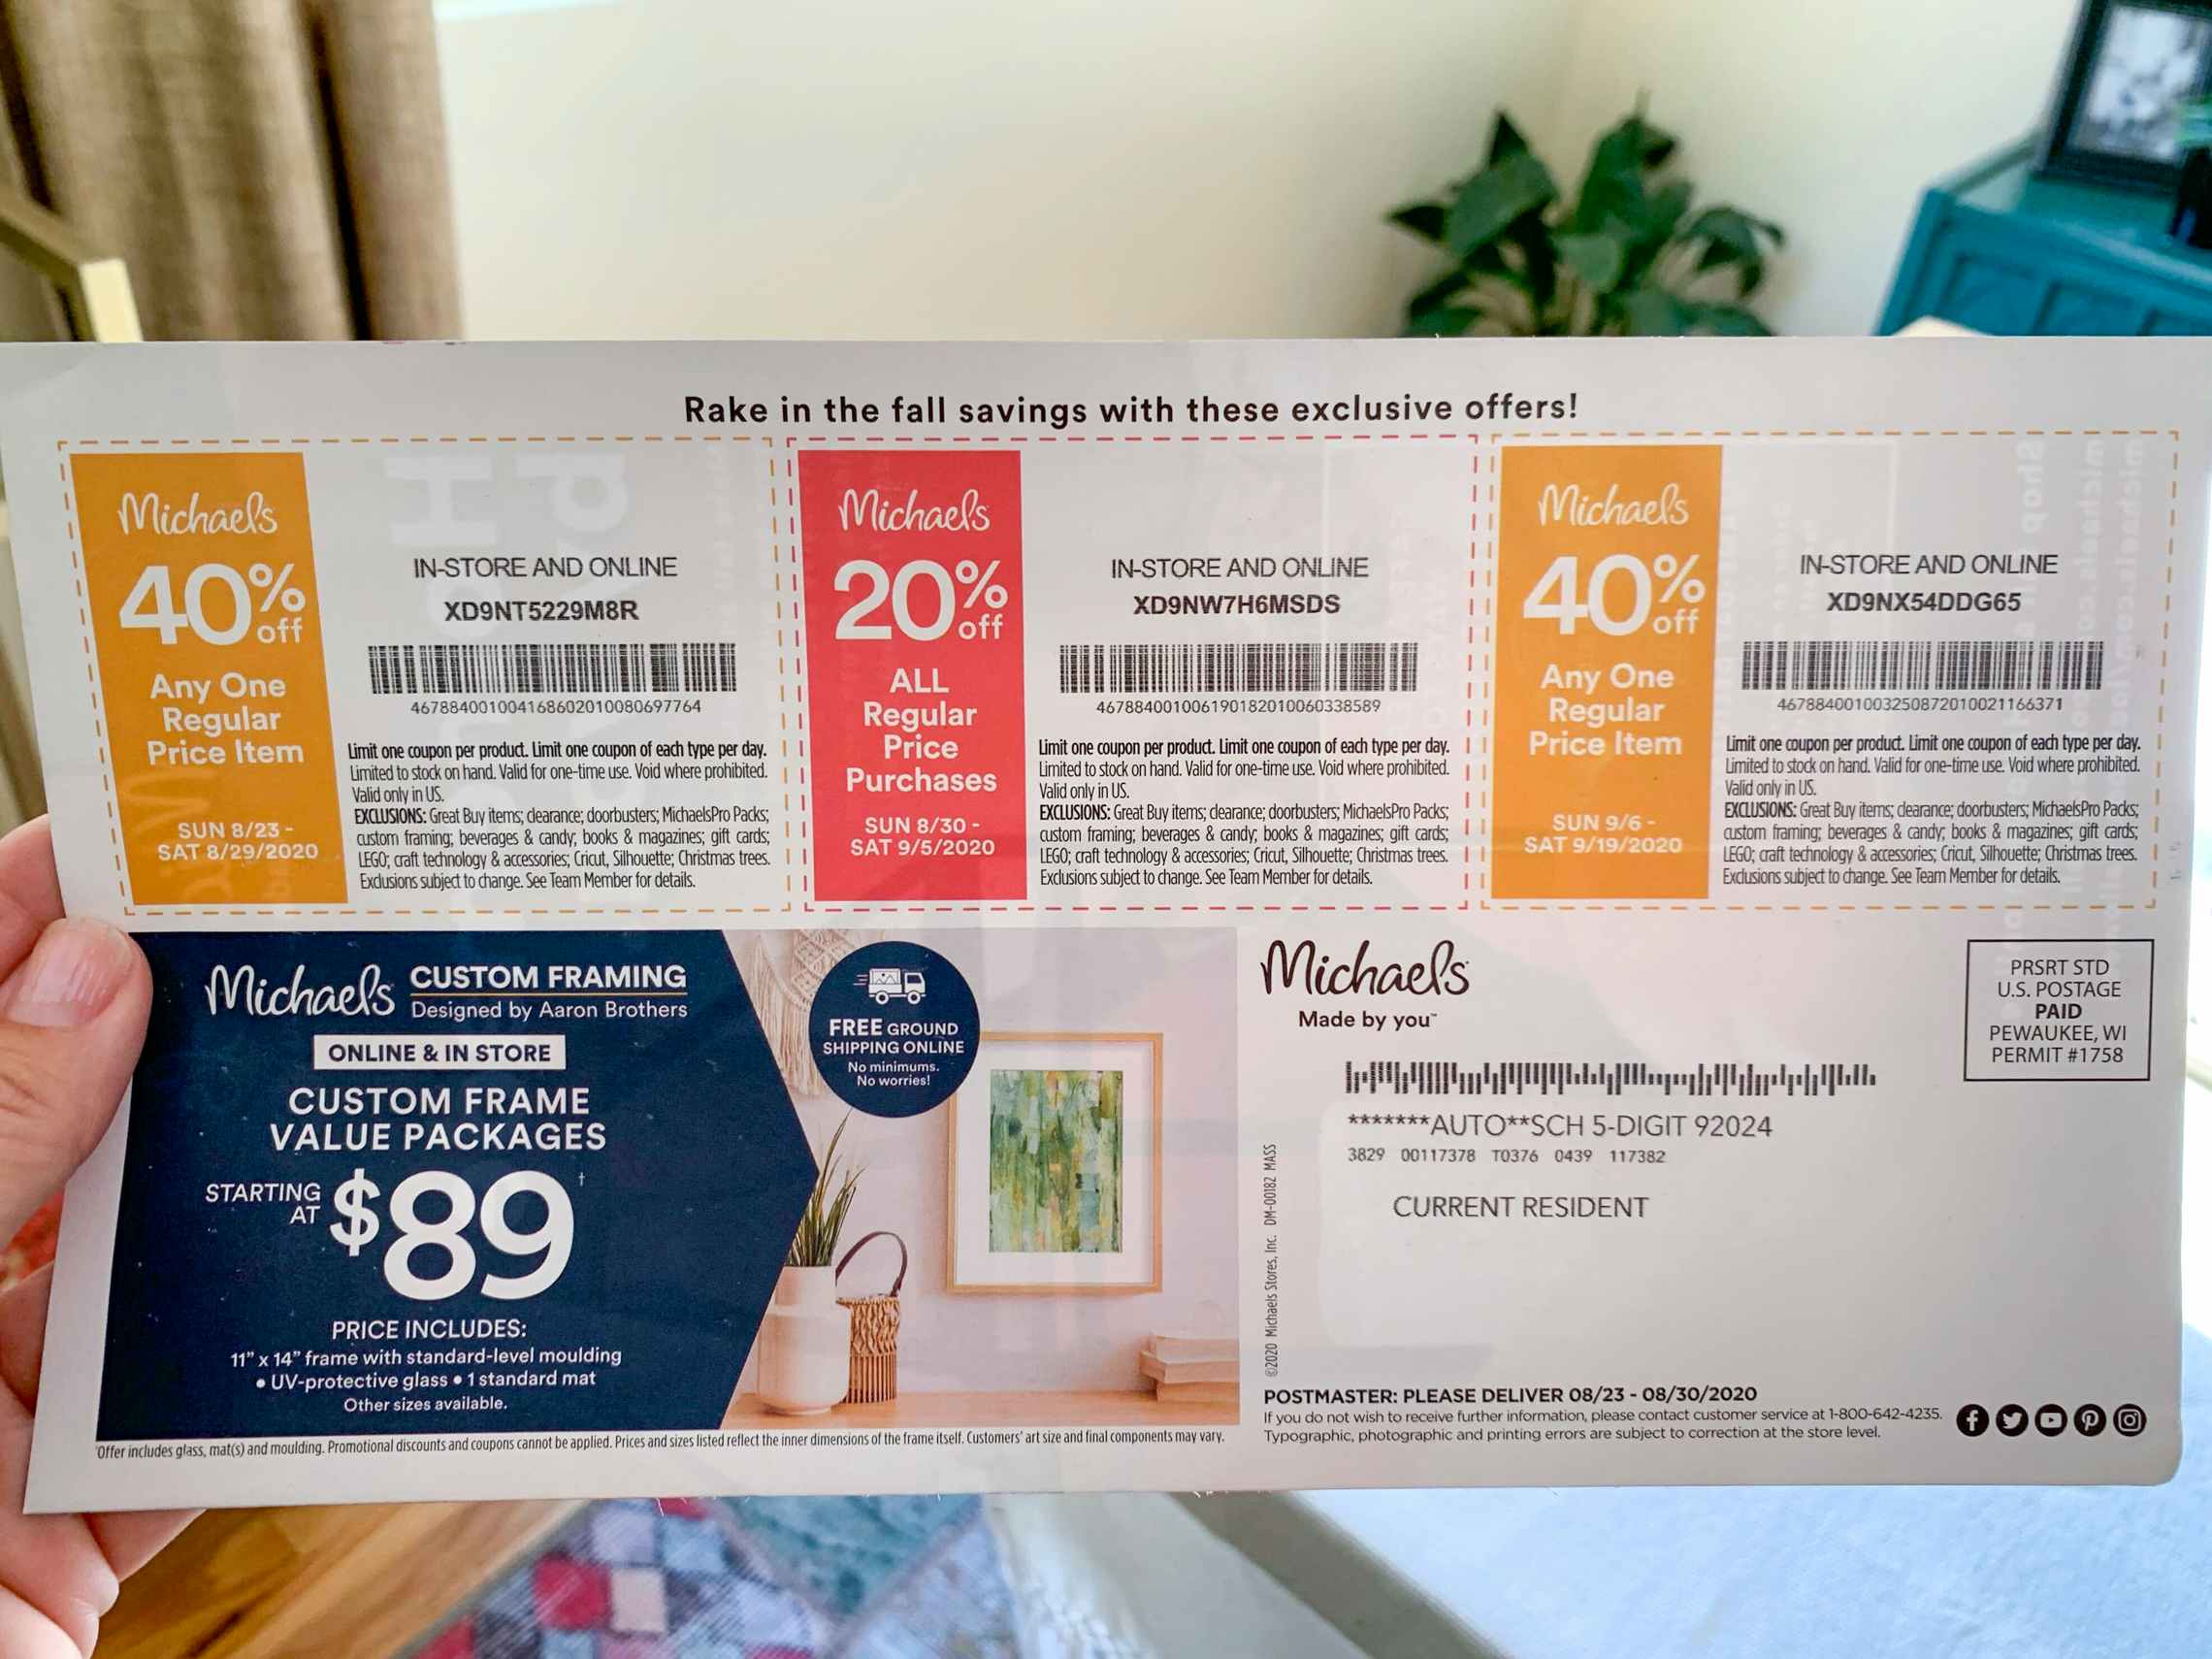 Michaels President's Day Coupons!